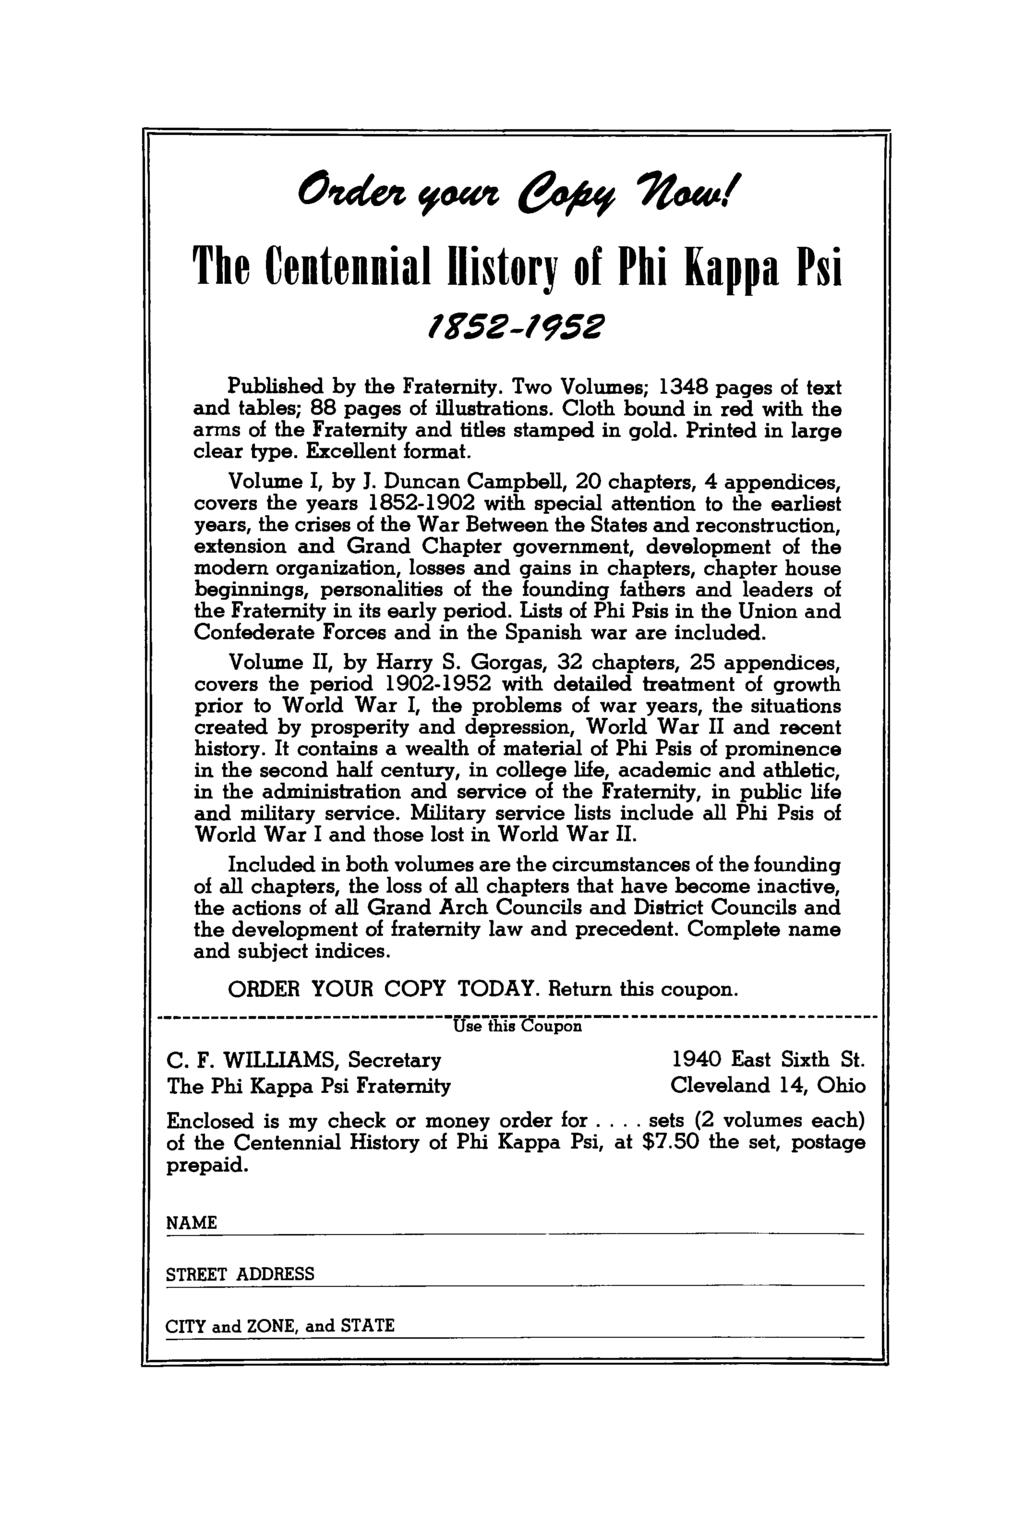 Ondefi (f^uft ^ofufr Tfat^Af The Centennial History of Piii Kappa Psi Published by the Fraternity. Tvro Volumes; 1348 pages of text and tables; 88 pages of illustrations.